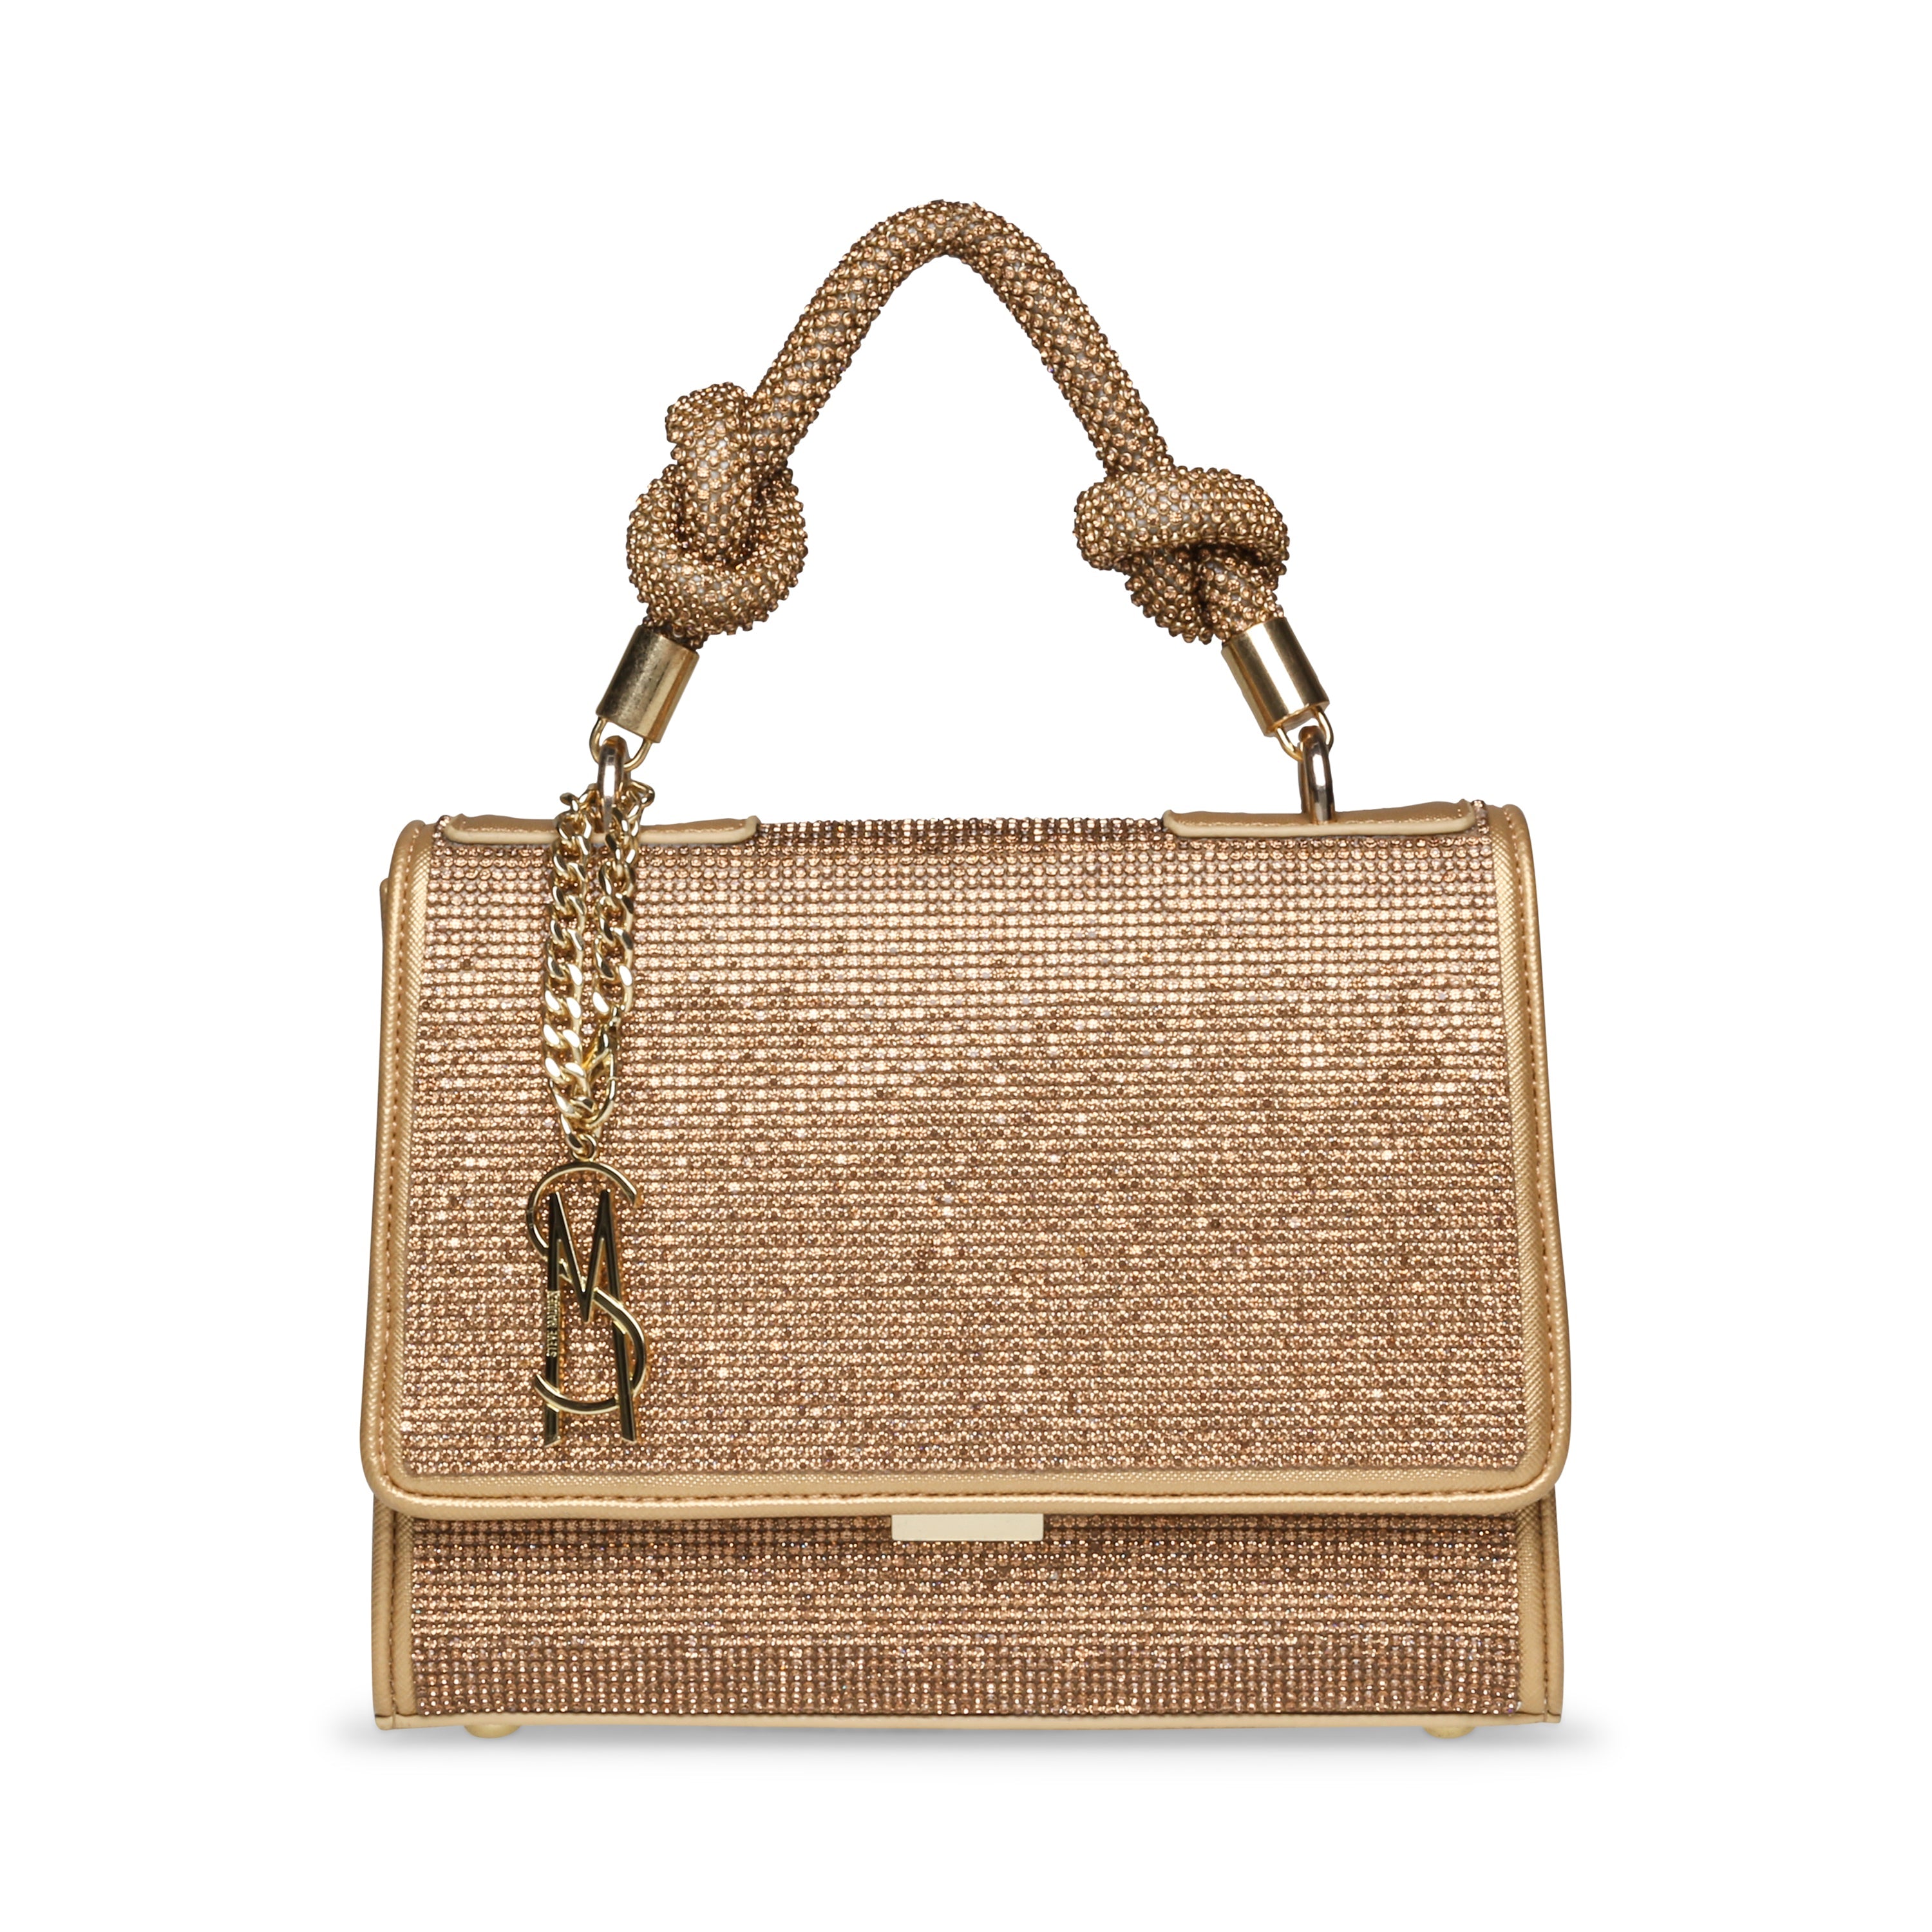 BKNOTTED CROSSBODY BAG GOLD